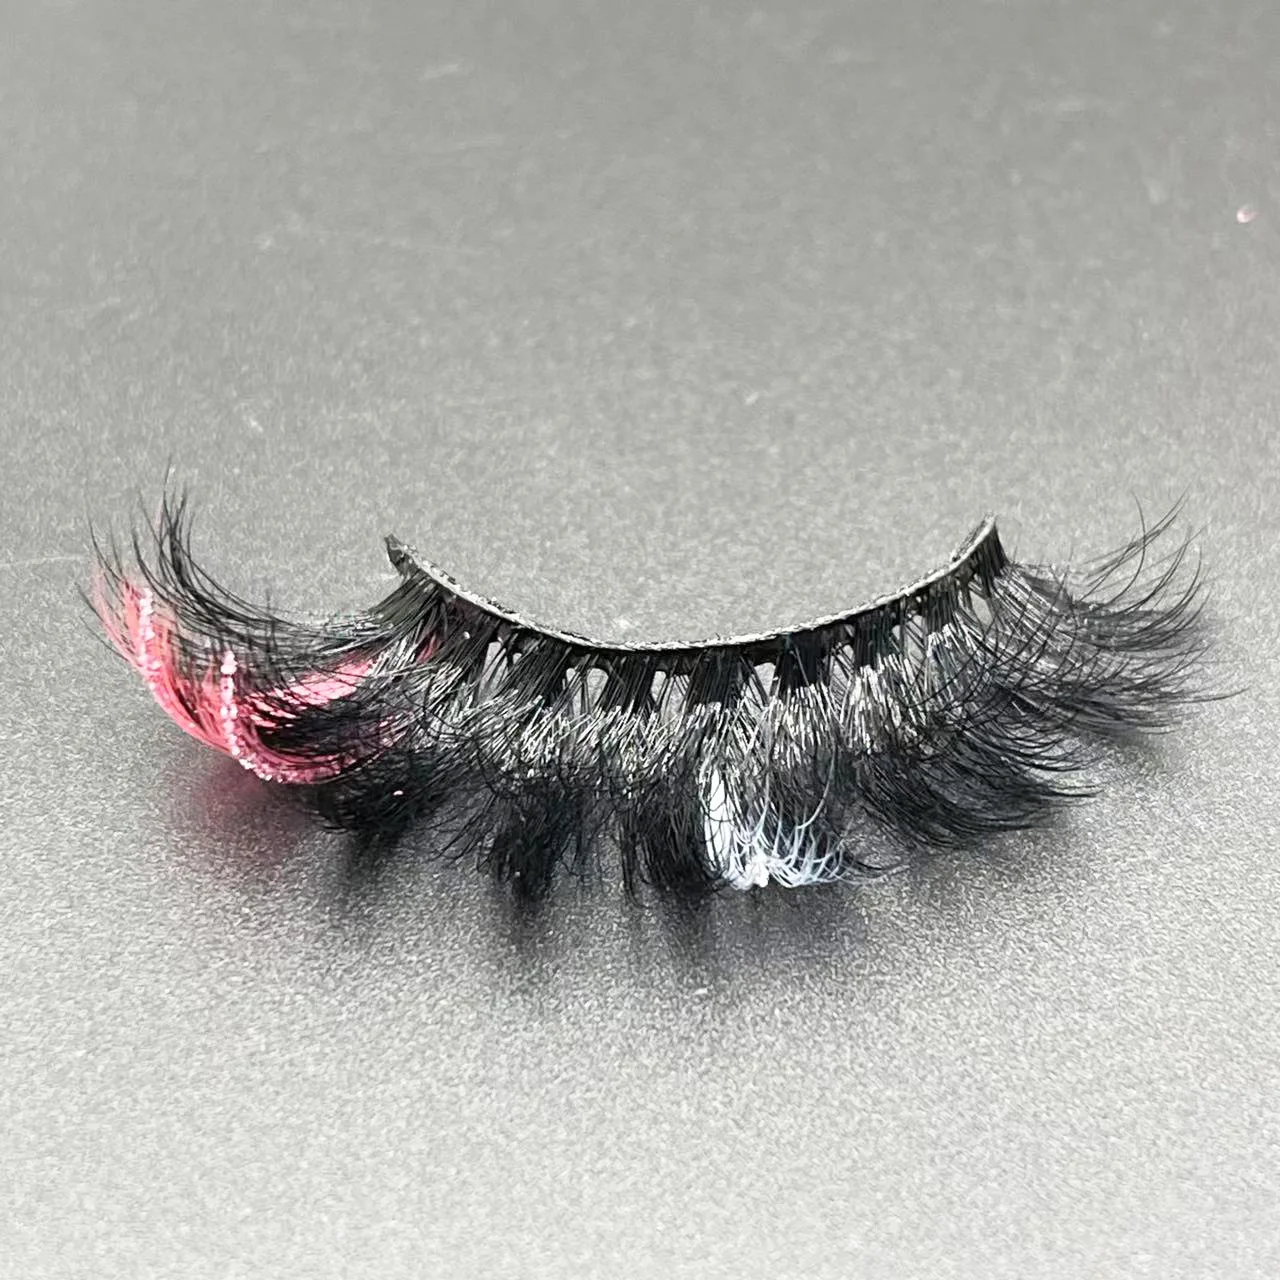 Hbzgtlad Colored Lashes Glitter Mink 15mm -20mm Fluffy Color Streaks Cosplay Makeup Beauty Eyelashes -Outlet Maid Outfit Store S989dbc8359a64a09919dbcffbc479d2el.jpg